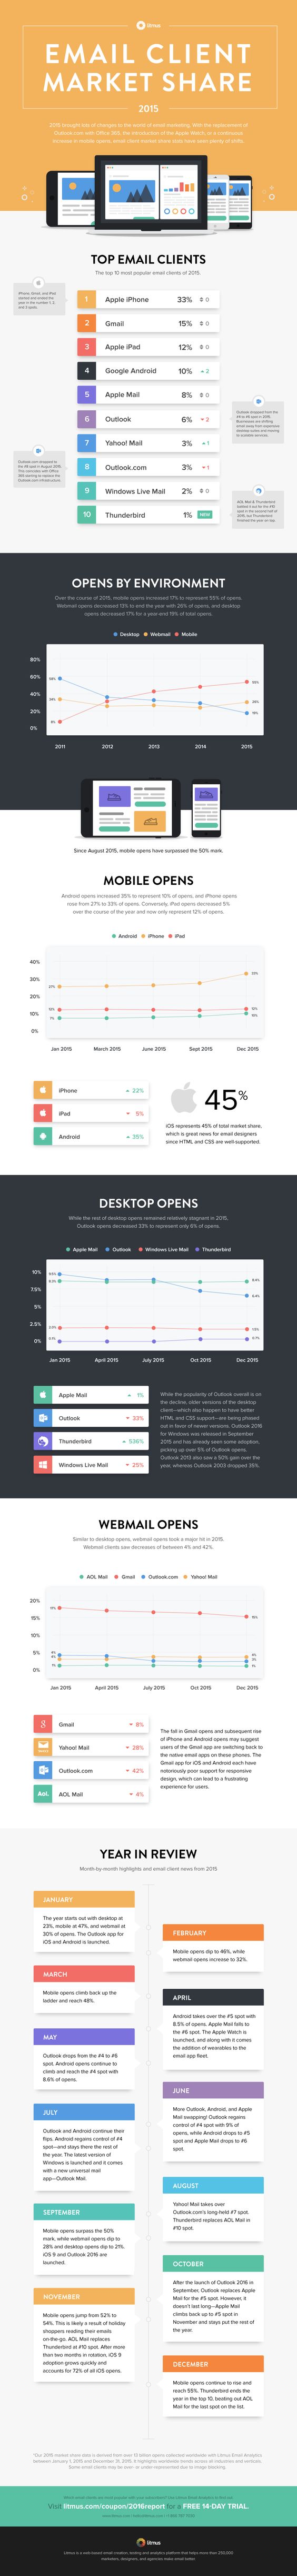 Infographic of the Week: Email Client Market Share Statistics In 2015